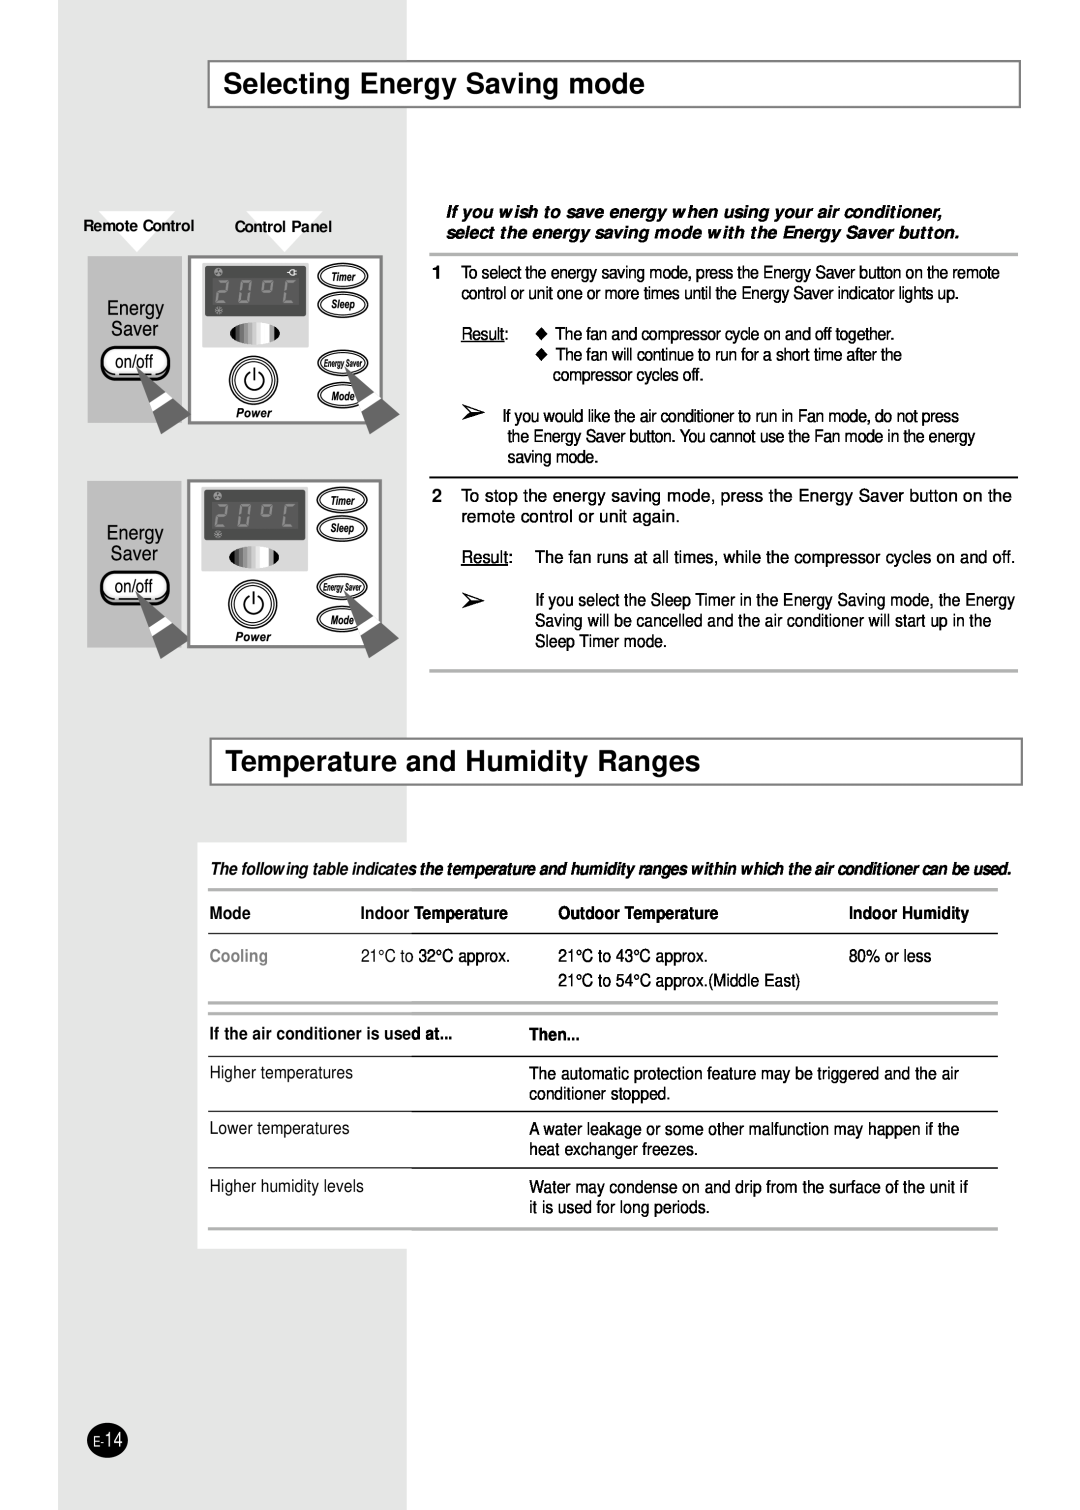 Samsung AW12FADBA Selecting Energy Saving mode, Temperature and Humidity Ranges, Remote Control, Control Panel, Cooling 